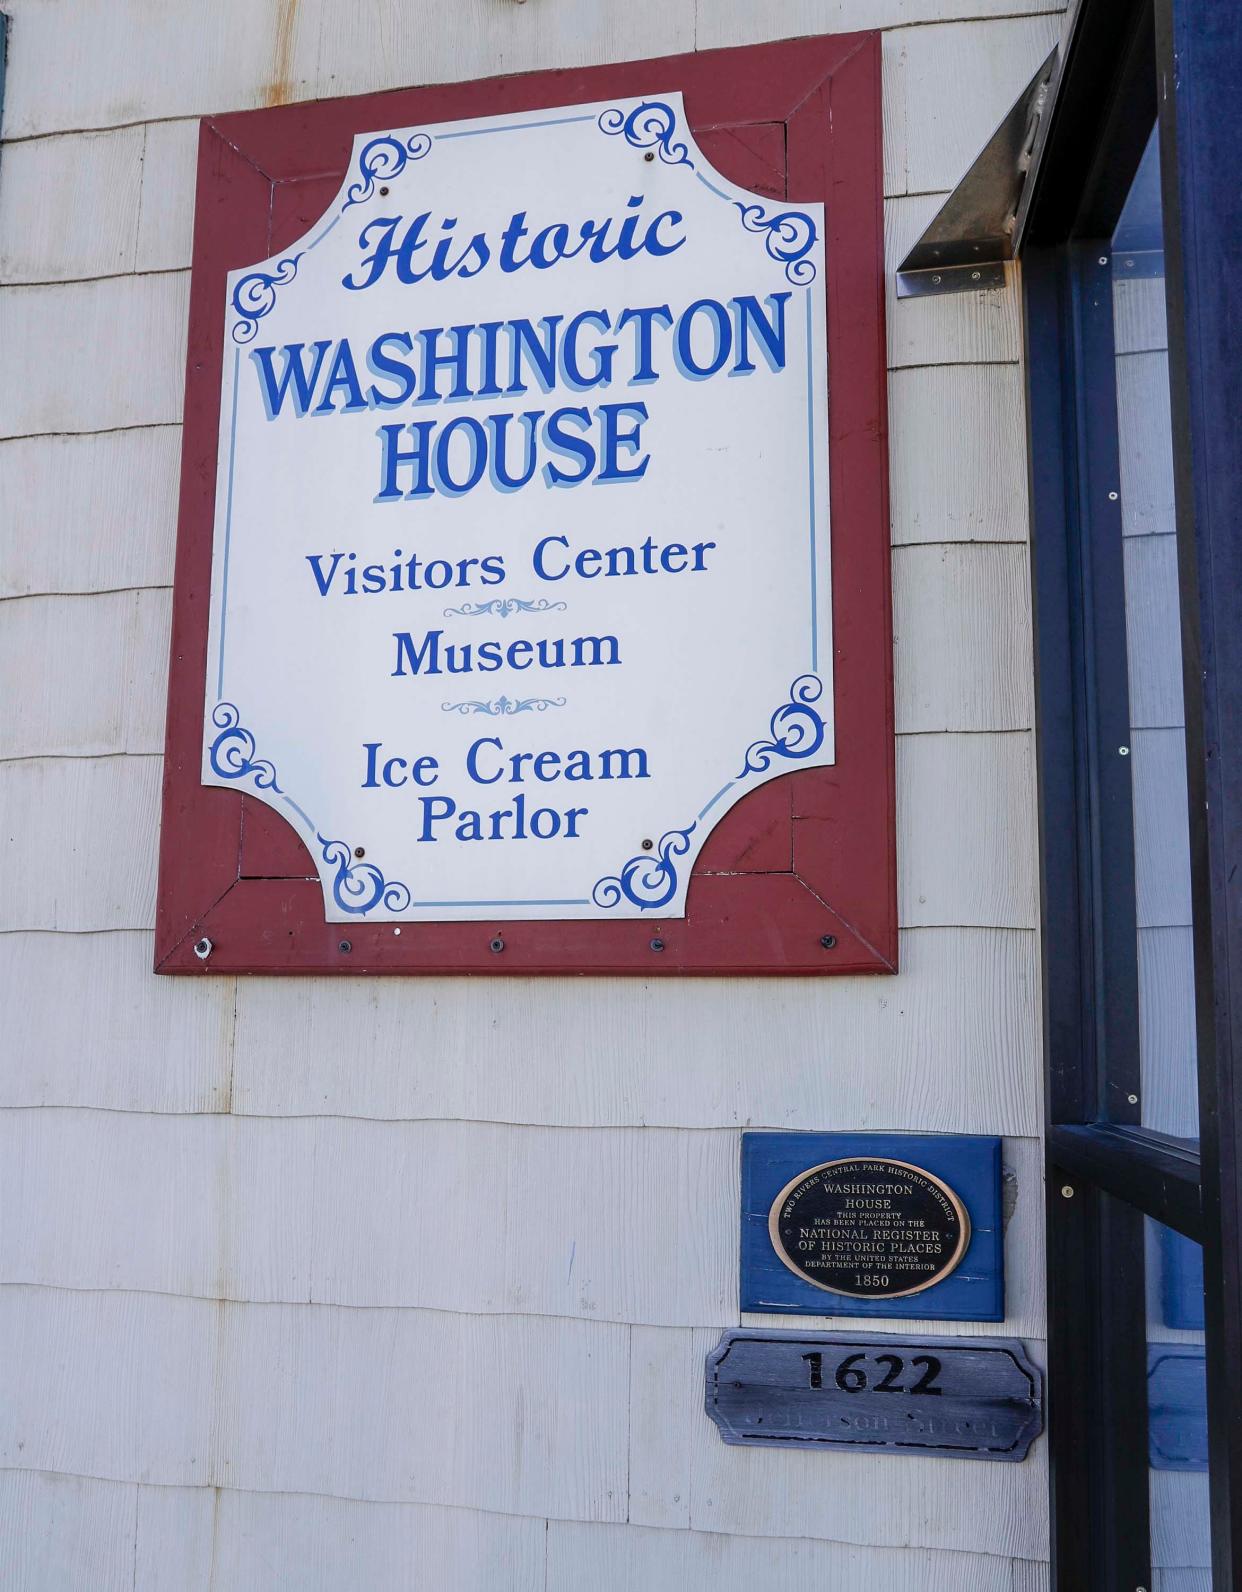 The sign at the Historic Washington House as seen, Wednesday, September 15, 2021, in Two Rivers, Wis. The firm is claimed to be the birth place of the Sundae.